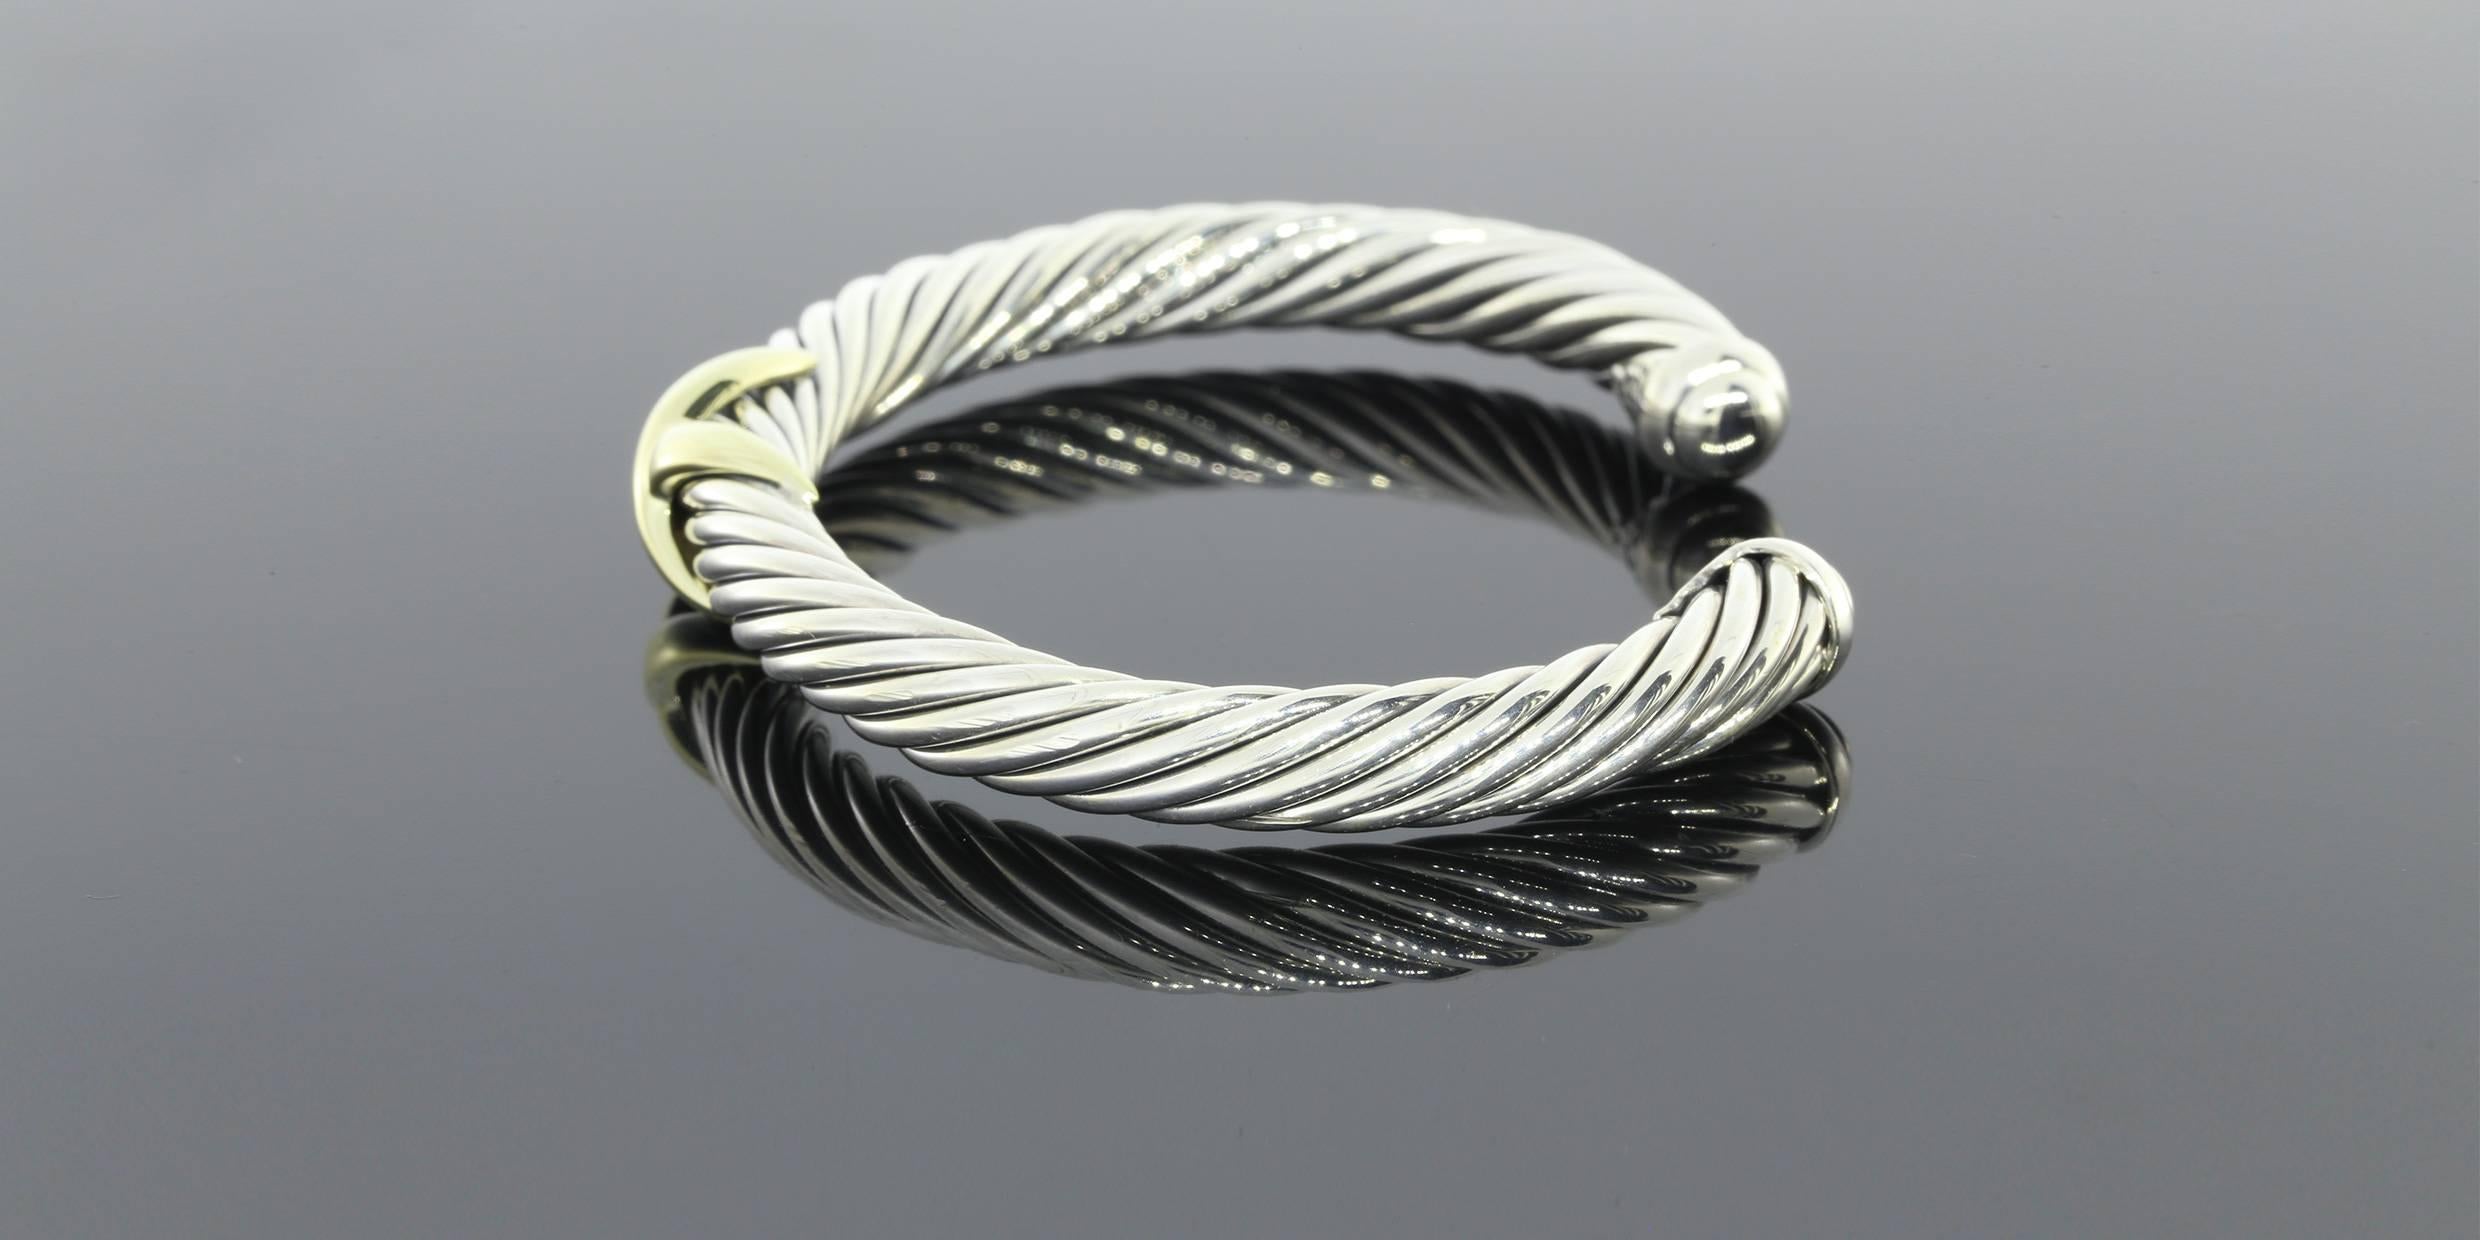 This cuff is part of the designer line David Yurman. The cuff features a cable style base with a yellow gold X detail. The cuff measures 7 millimeters in thickness. The bangle appraises for $775.